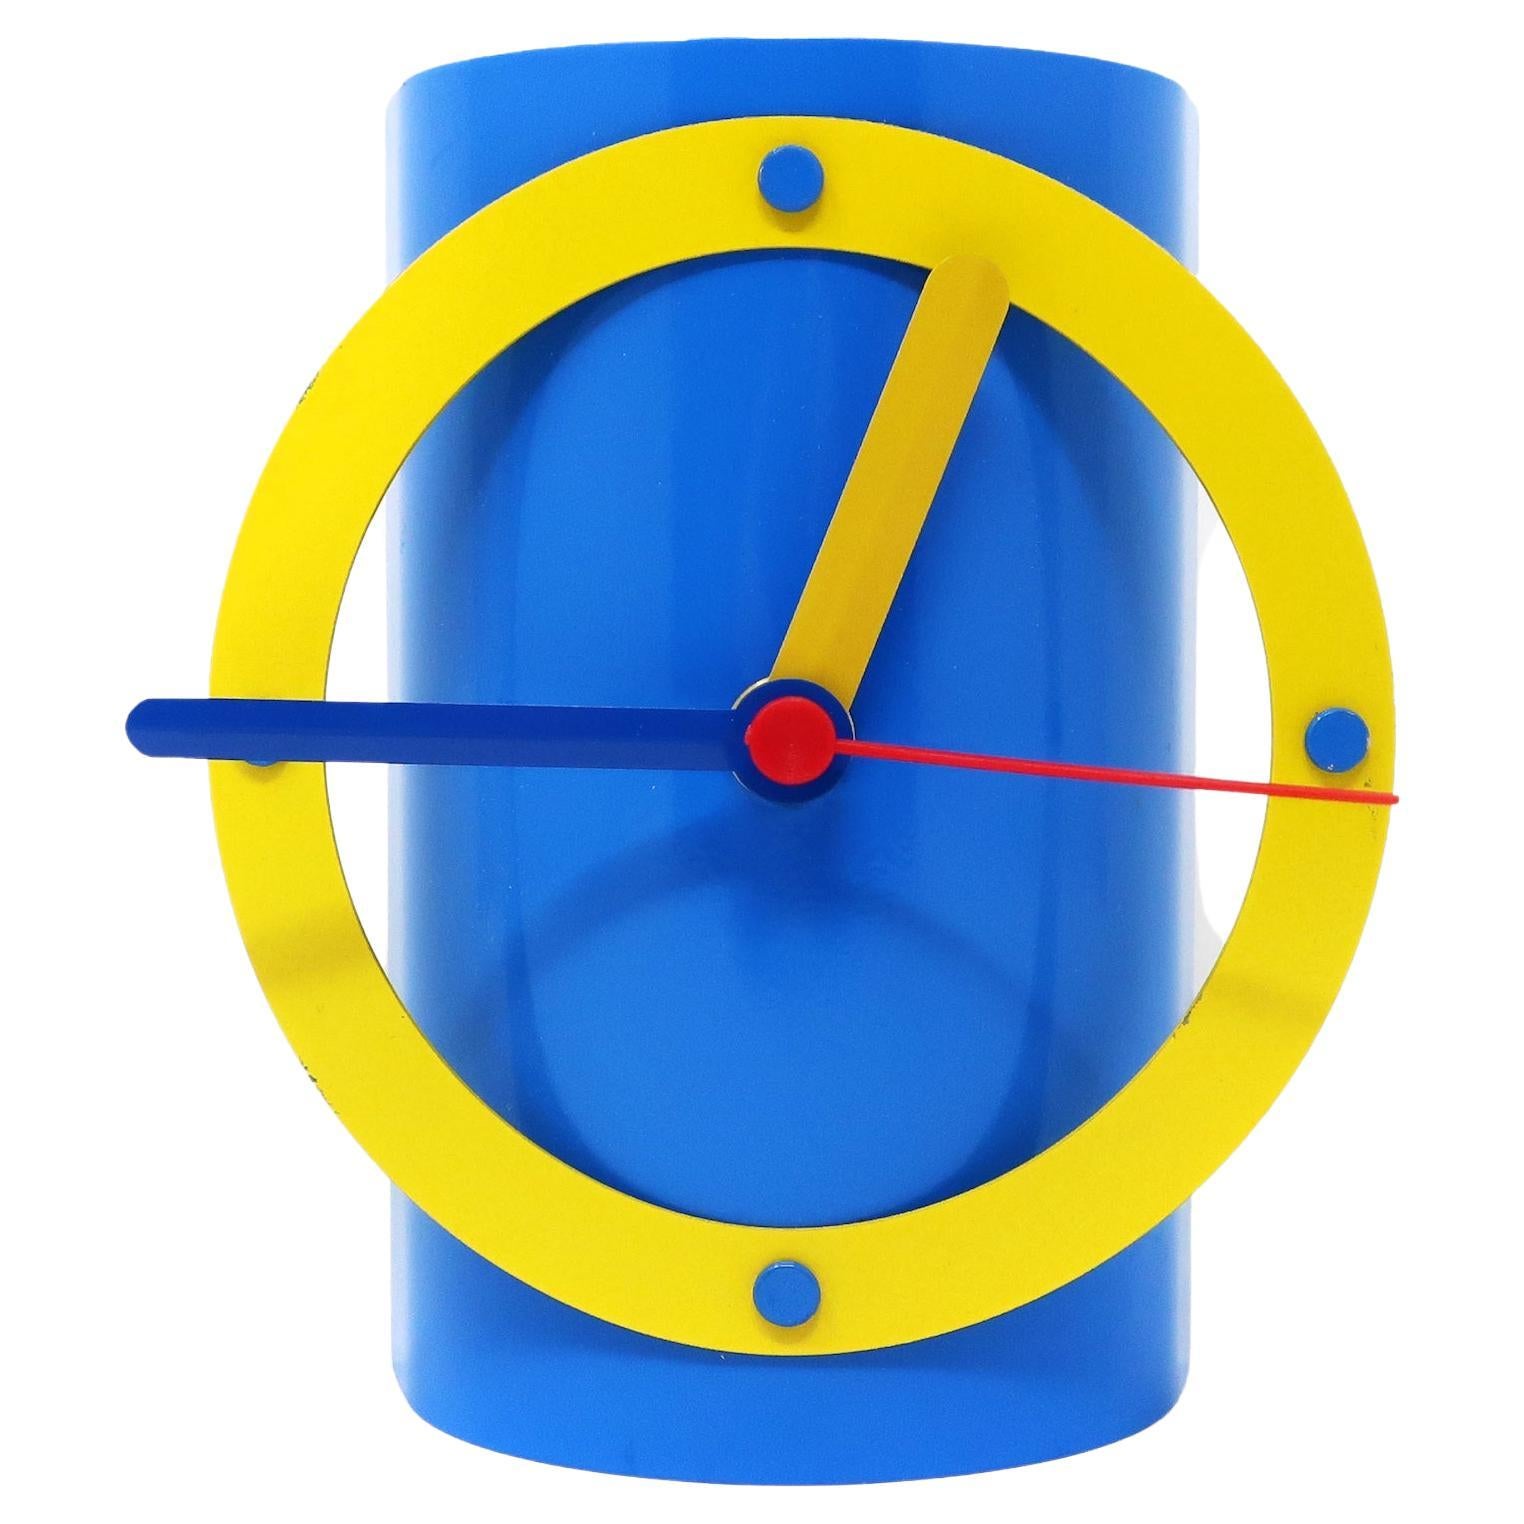 1980s Blue & Yellow Metal Desk Clock by Time Square For Sale